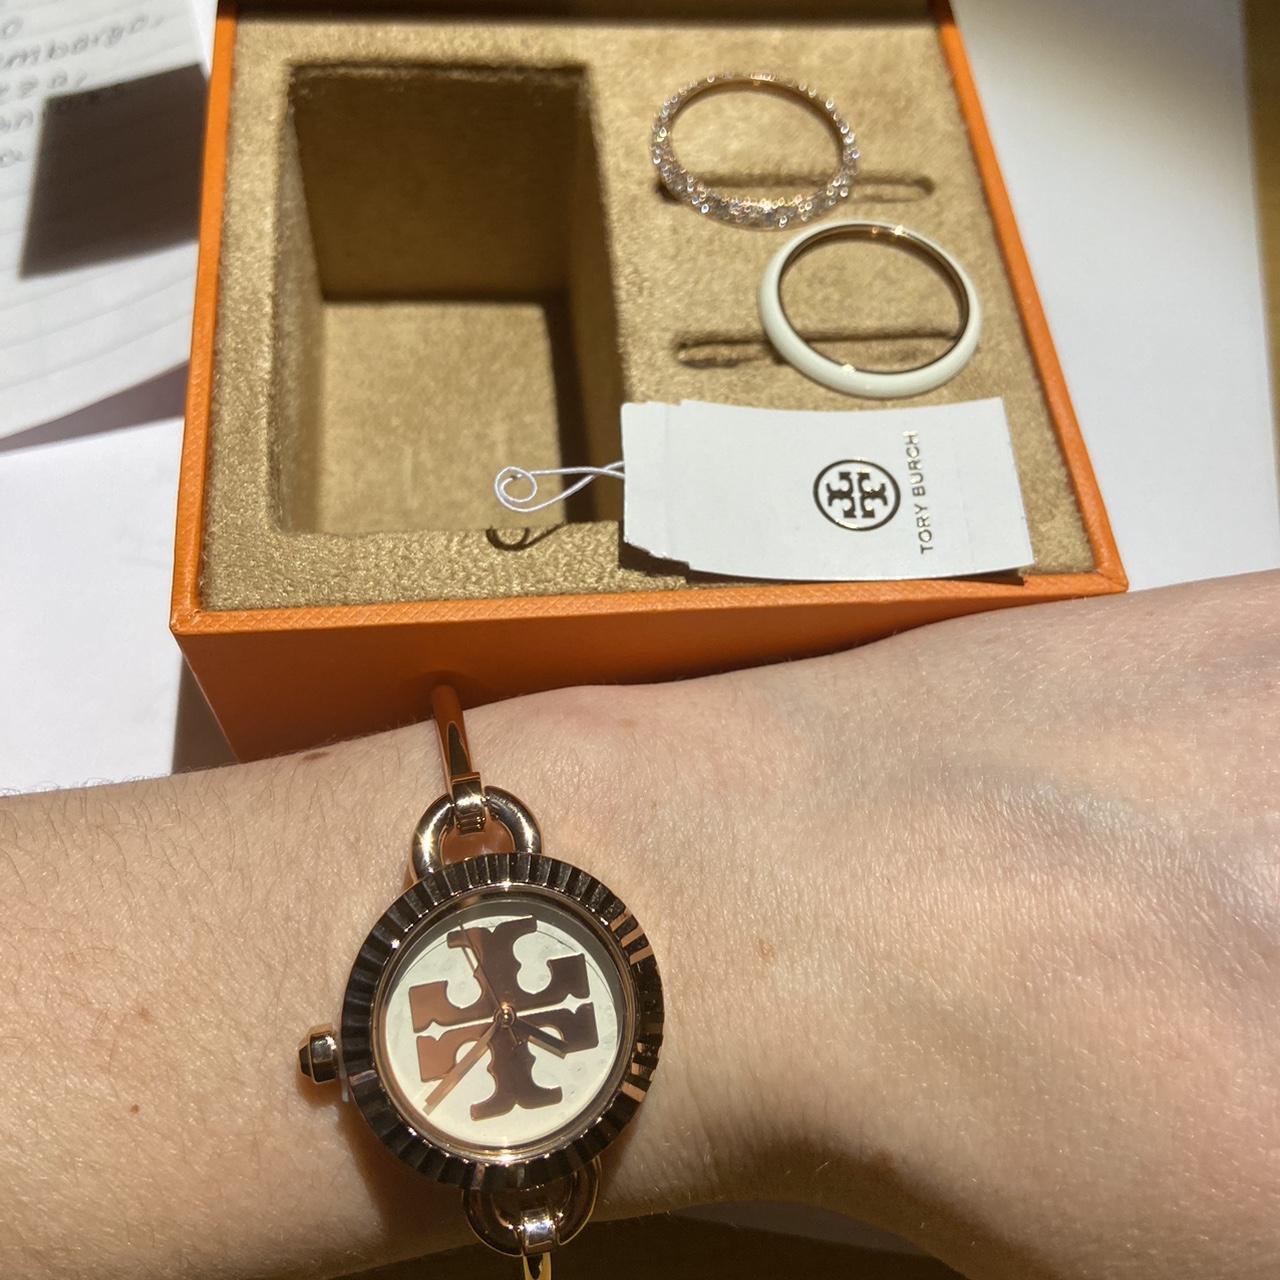 TORY BURCH ROSE GOLD WATCH With Depop